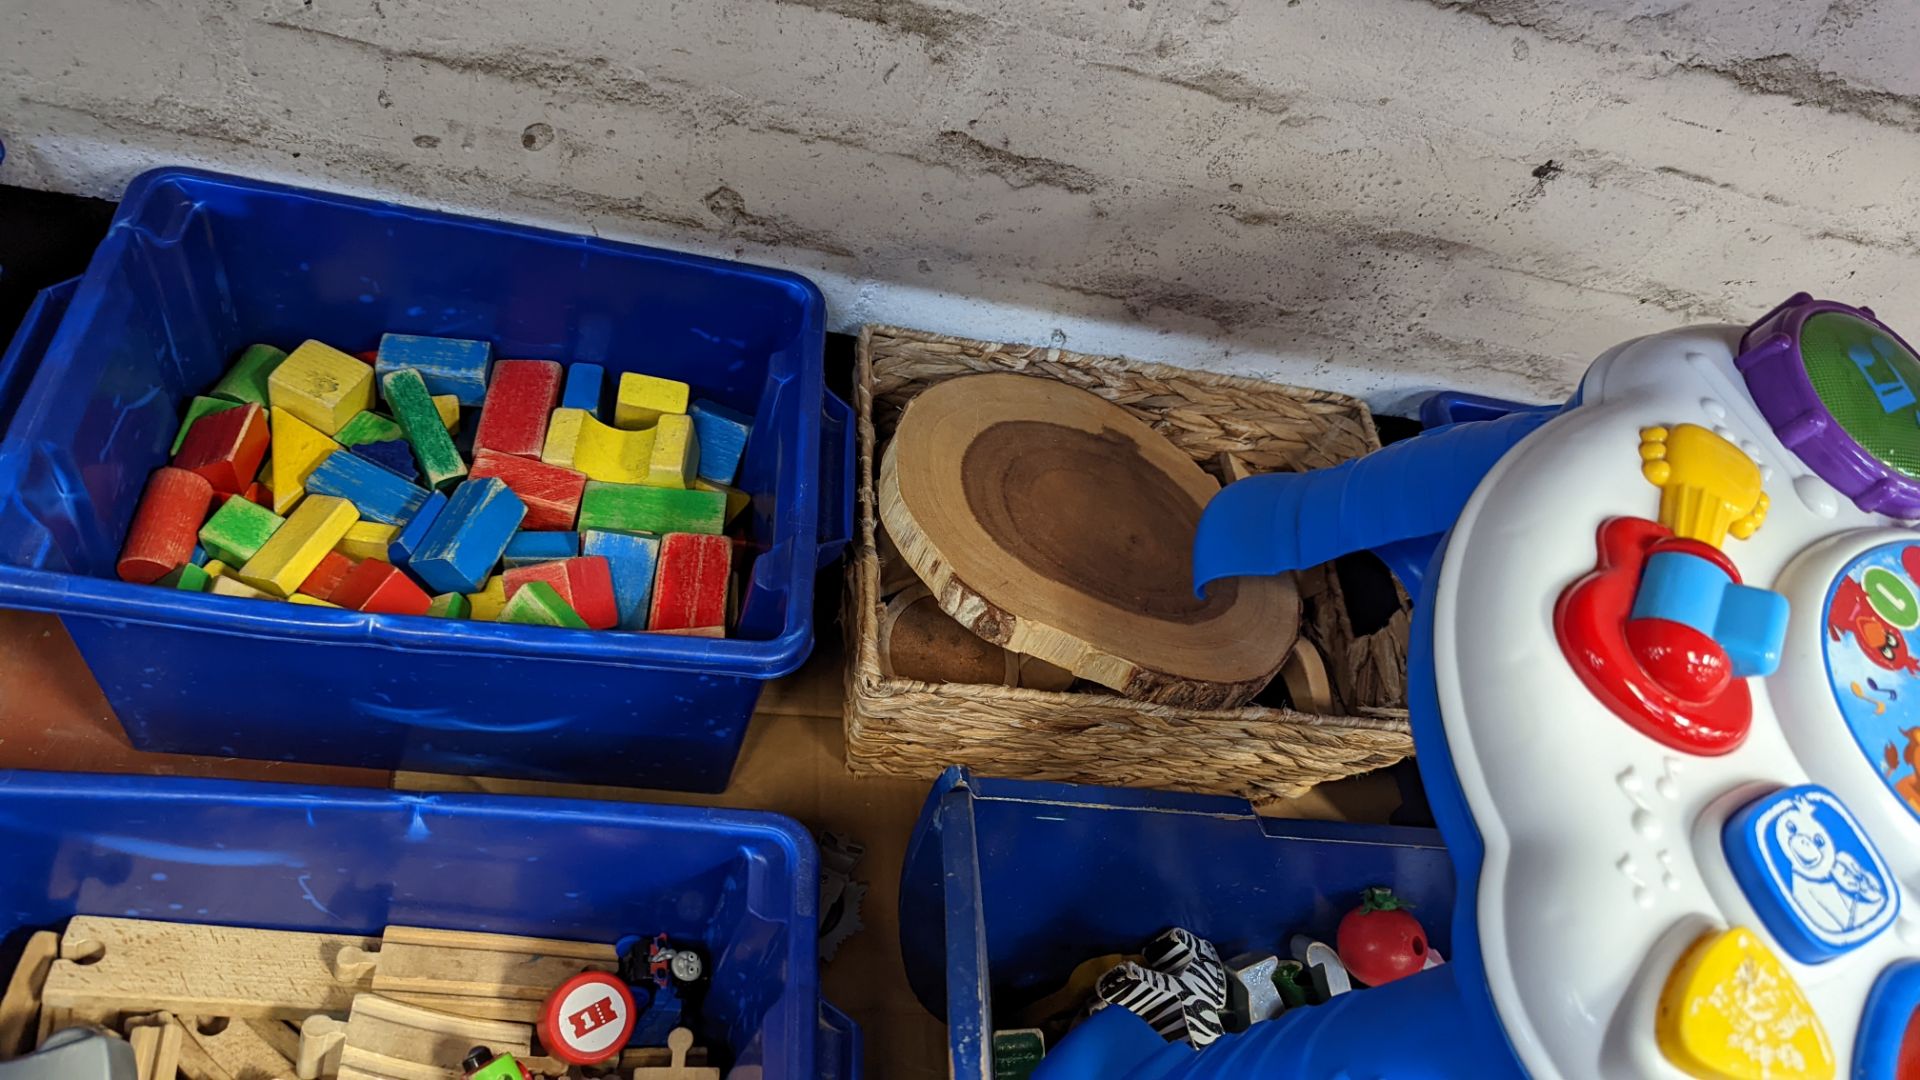 Contents of a bay of children's toys - all crates included - Image 11 of 14